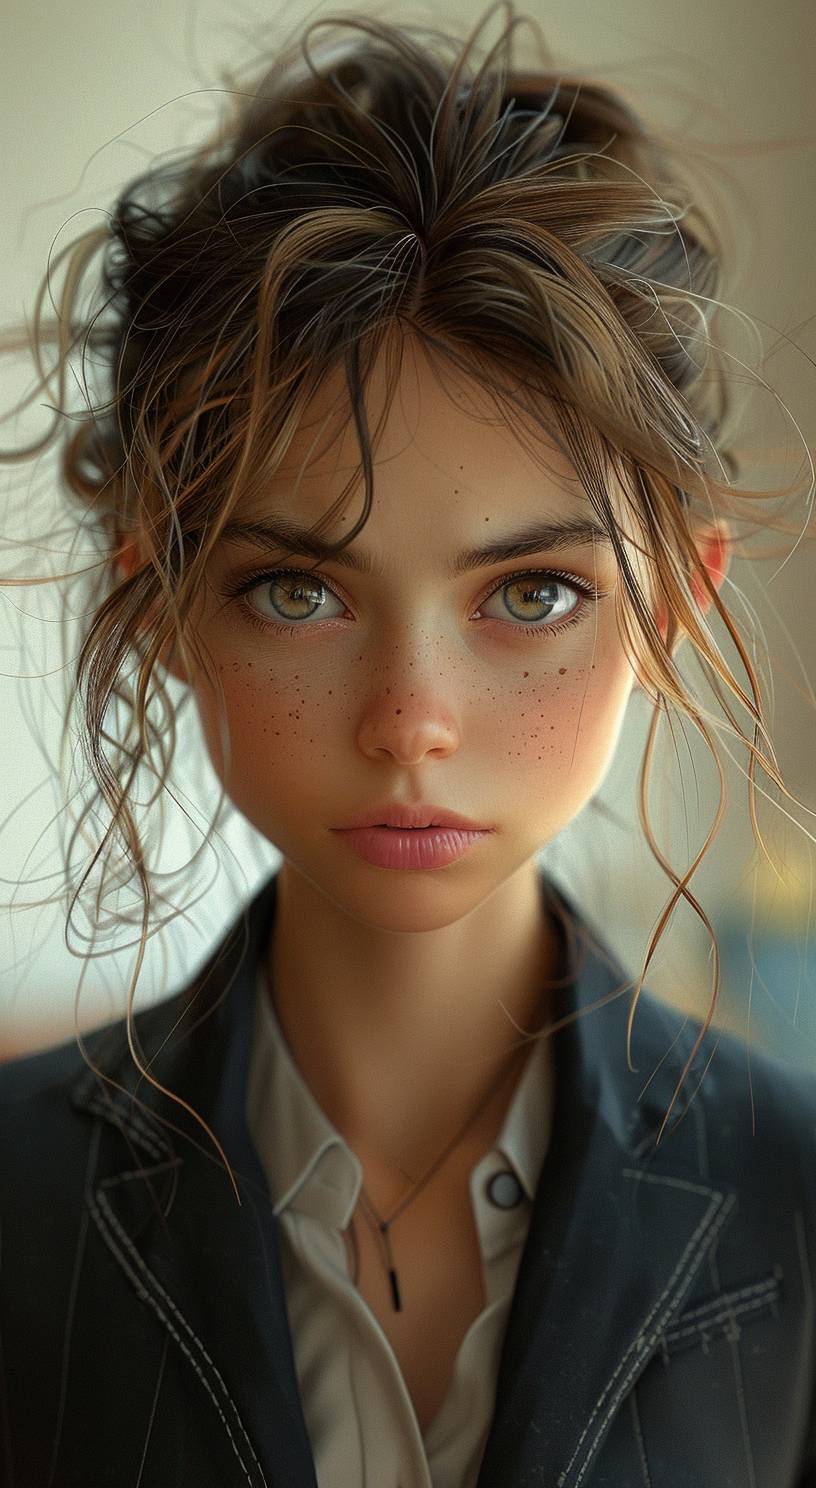 A young girl in a business suit with a very angry expression, in the style of Unreal Engine 5, cartoonish caricatures, I can't believe how beautiful this is, animated GIFs, life-like avian illustrations, close-up, soft, romantic scenes